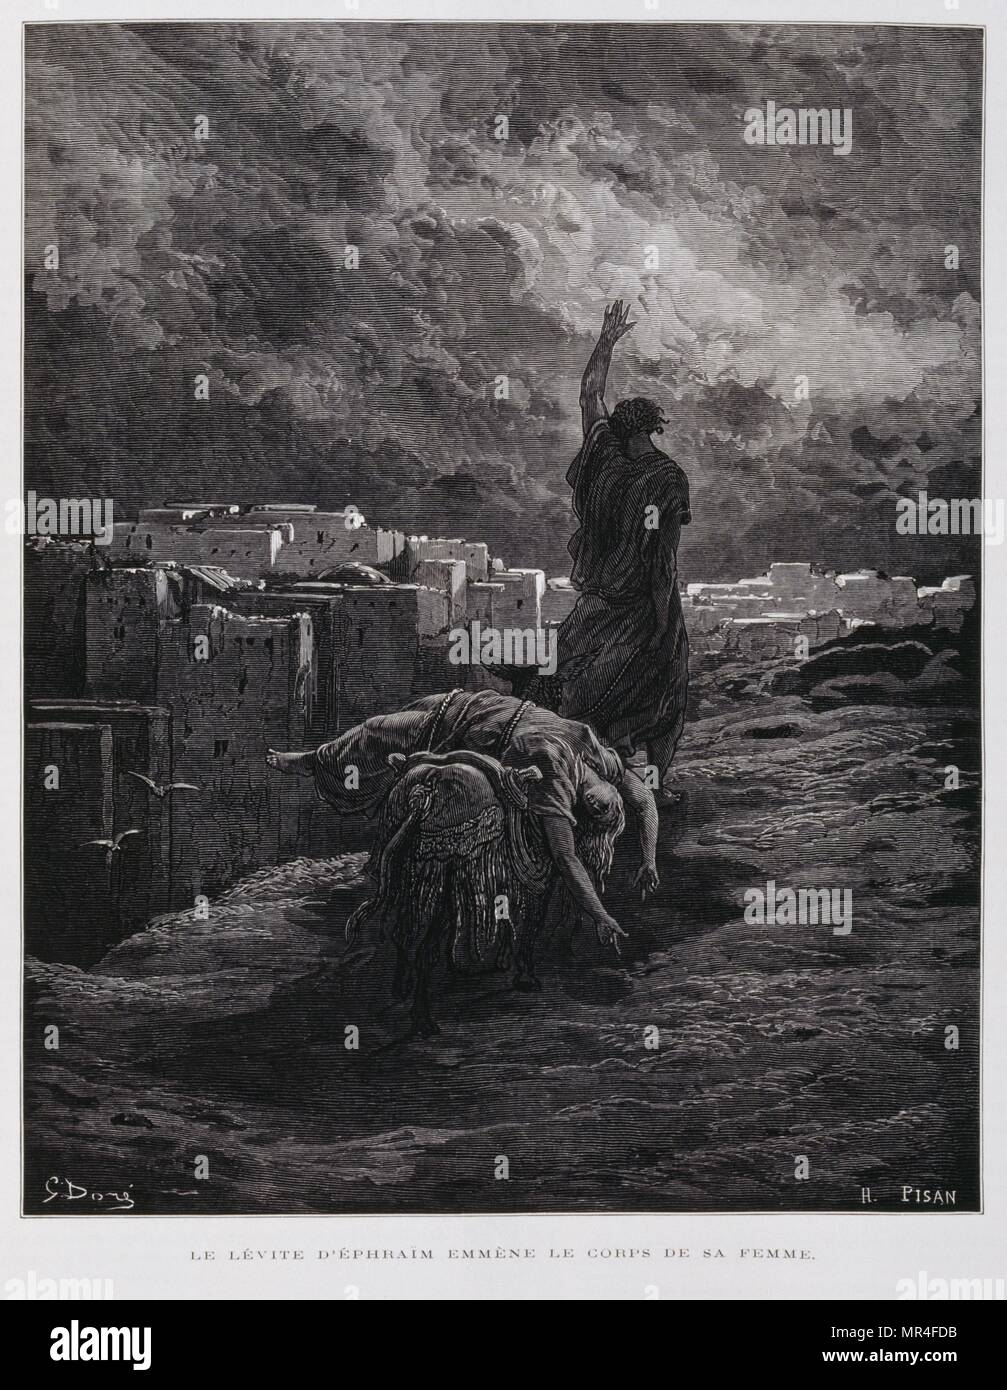 Outrage at Gibeah, the Levite carries his dead concubine away, Illustration from the Dore Bible 1866. In 1866, the French artist and illustrator Gustave Dore (1832–1883), published a series of 241 wood engravings for a new deluxe edition of the 1843 French translation of the Vulgate Bible, popularly known as the Bible de Tours. This new edition was known as La Grande Bible de Tours and its illustrations were immensely successful. Stock Photo